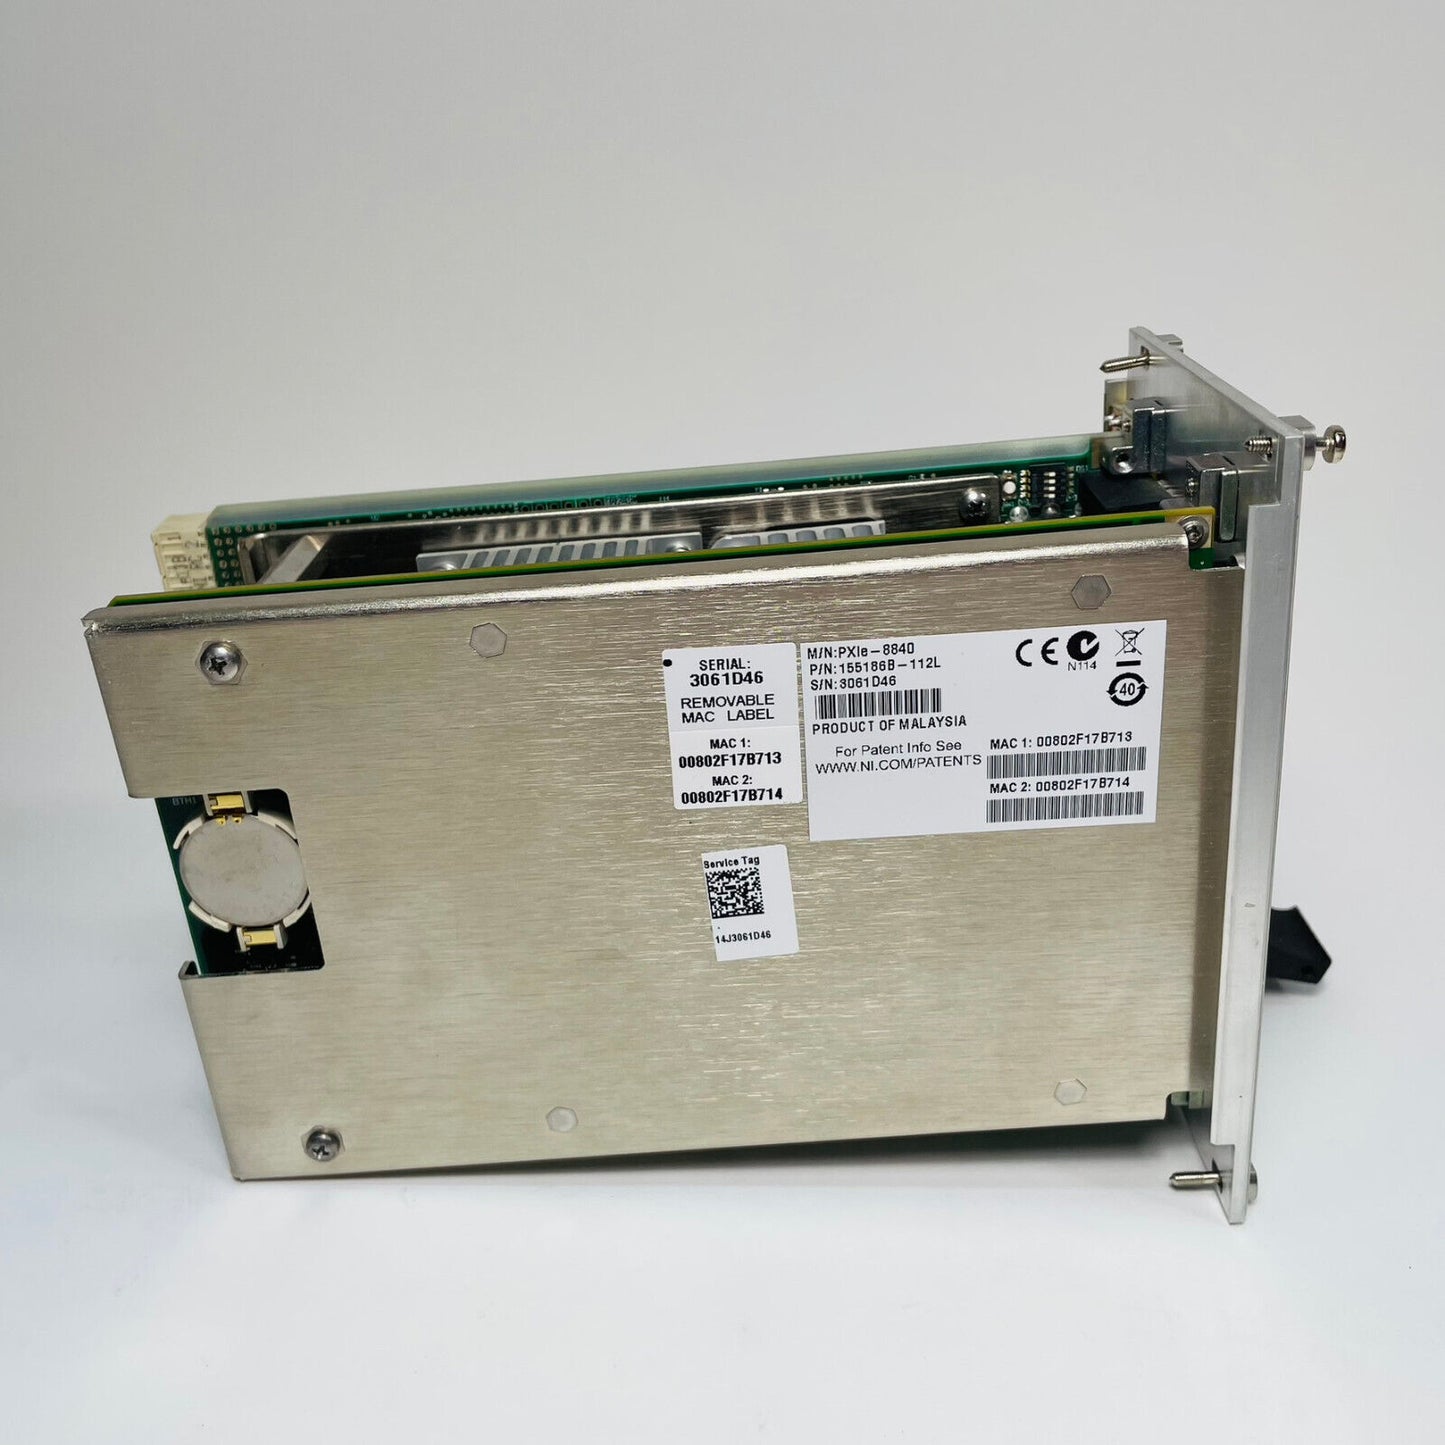 National Instruments PXIe-8840 PXI Embedded Controller, 155186B-112L